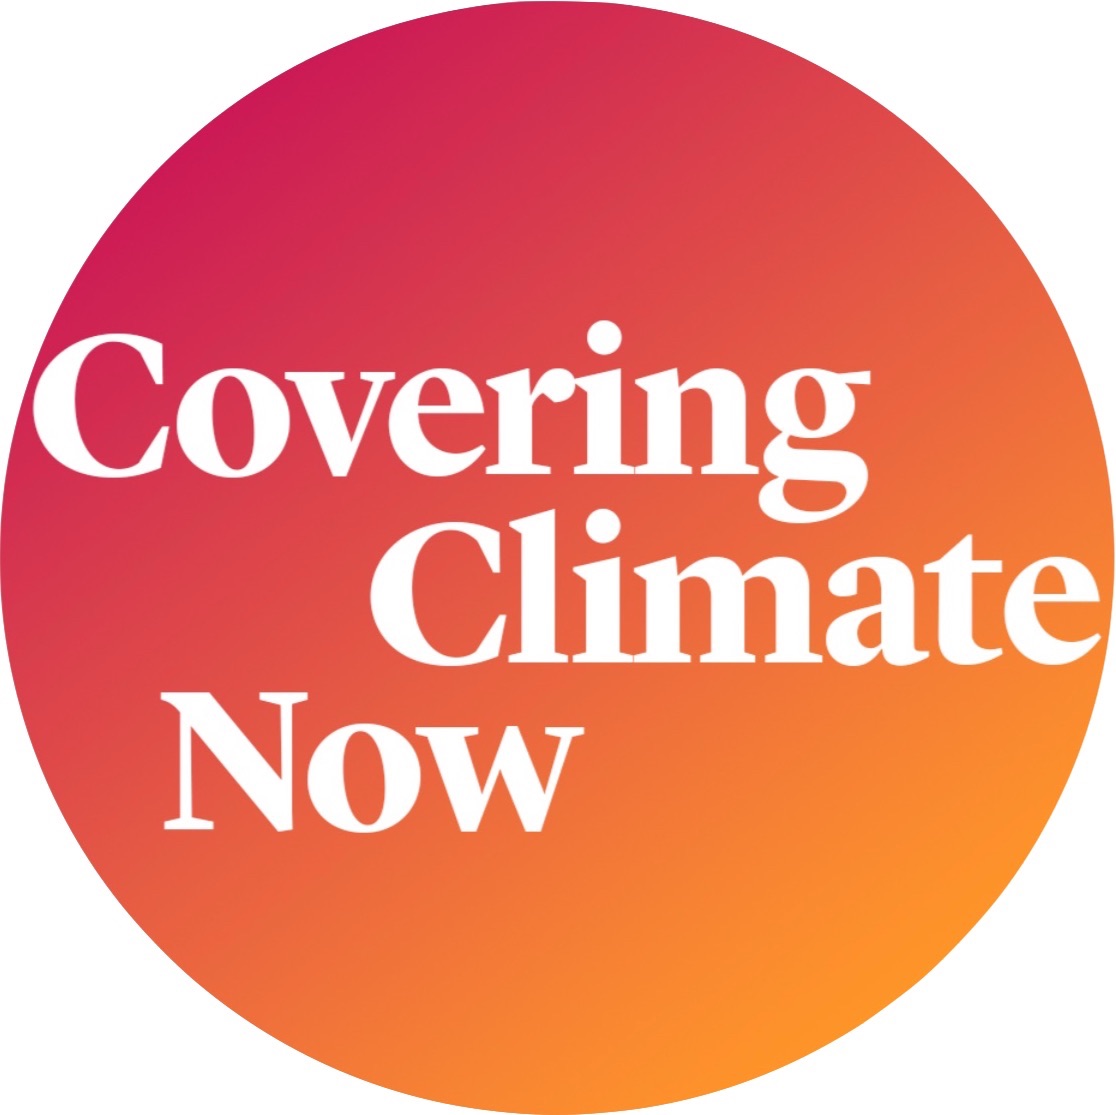 This story has been posted as part of the Covering Climate Now campaign.